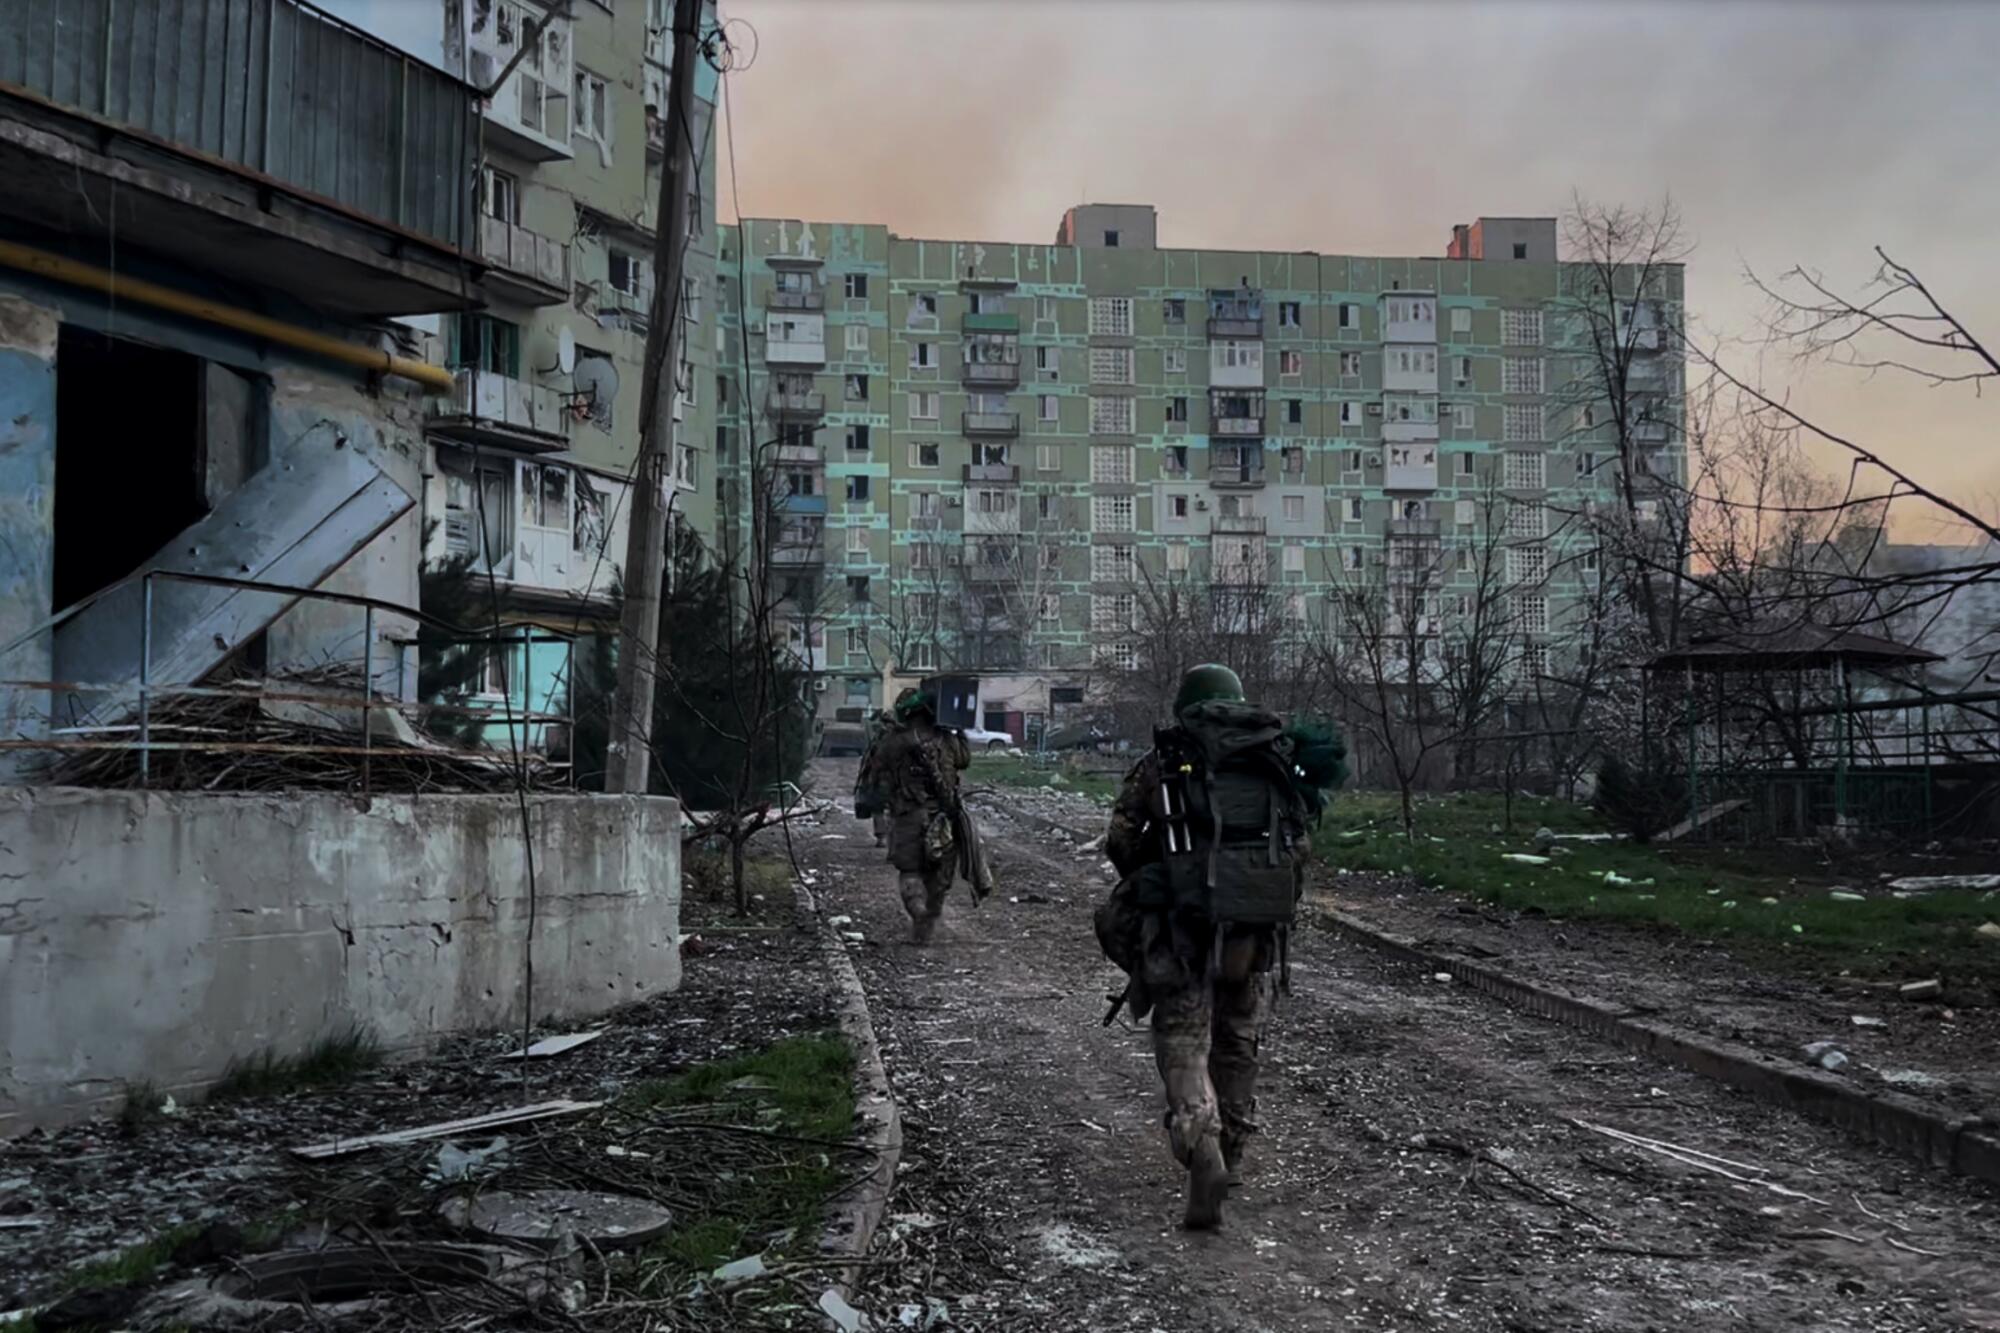 Soldiers file past bomb-shattered apartment buildings.